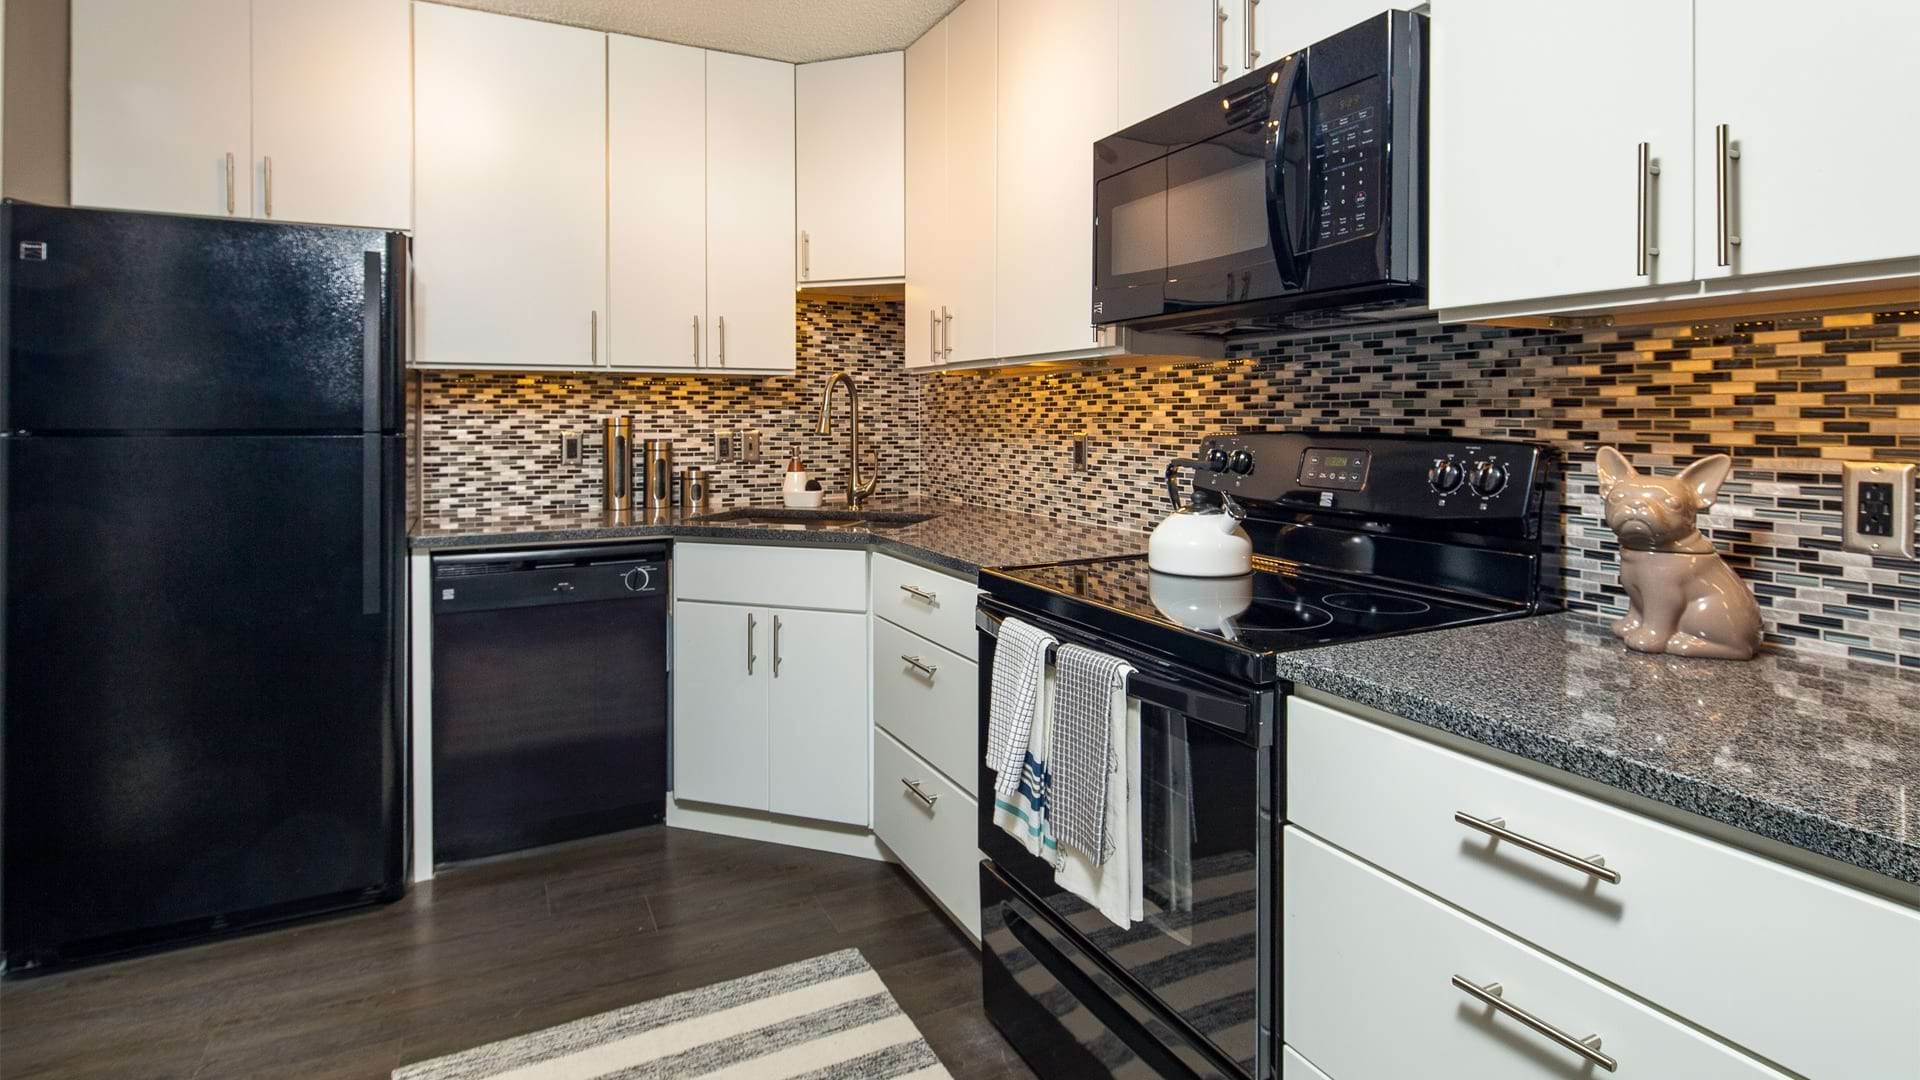 Kitchen Interiors at Our Spacious Apartments Near UNCC